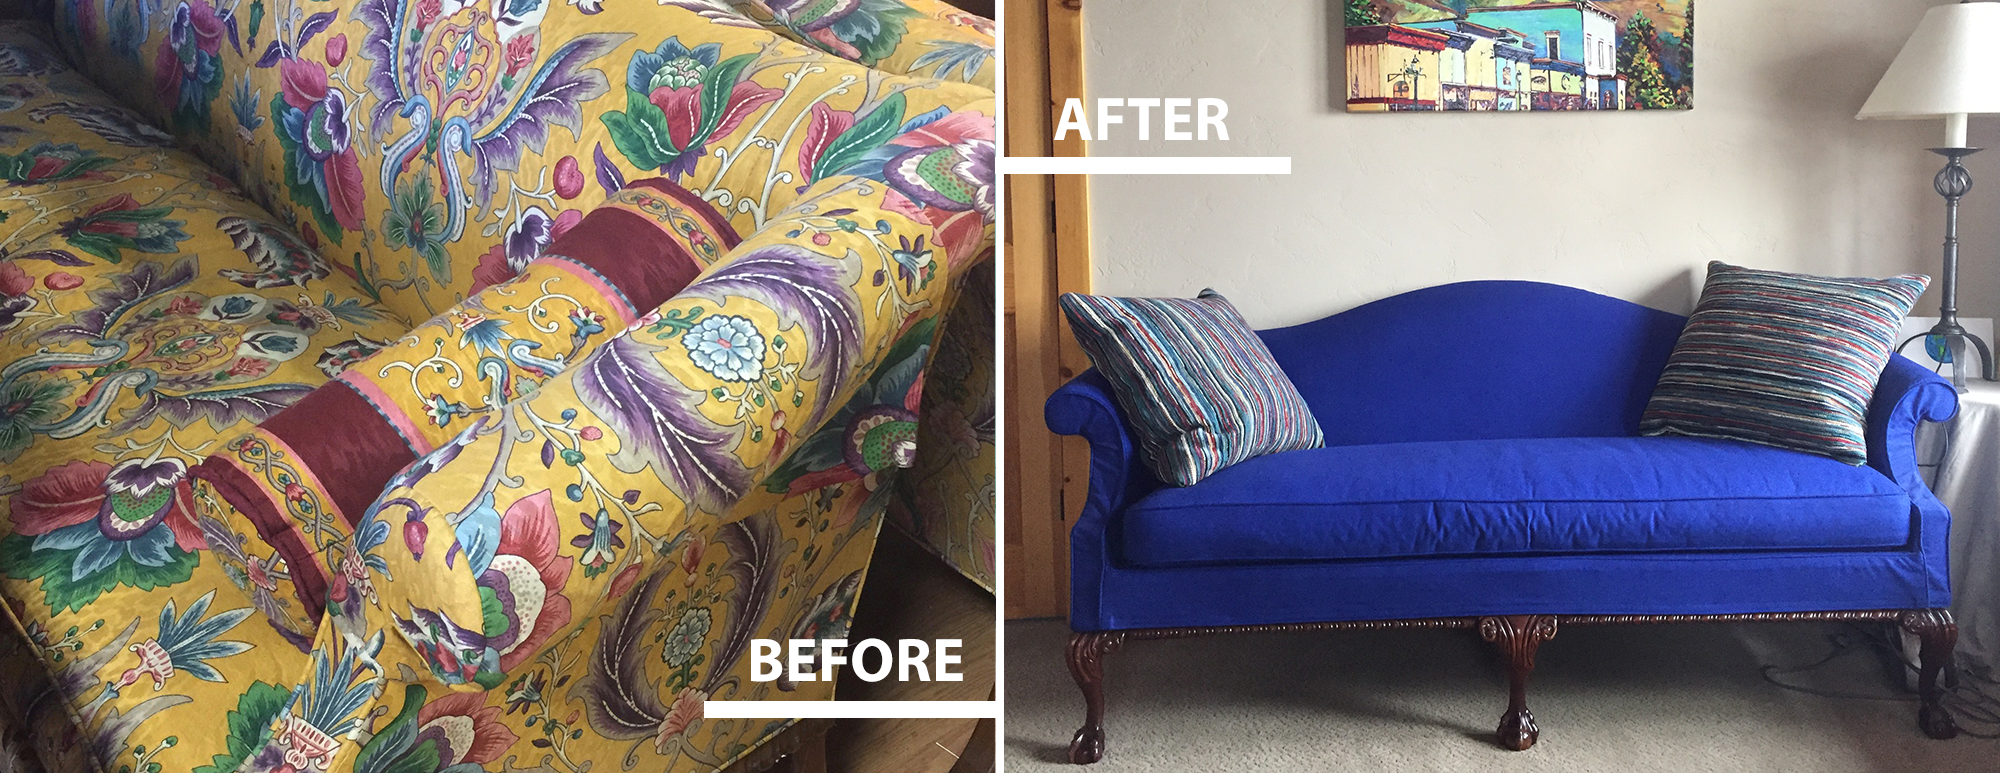 Slip Covered Couch Before and After